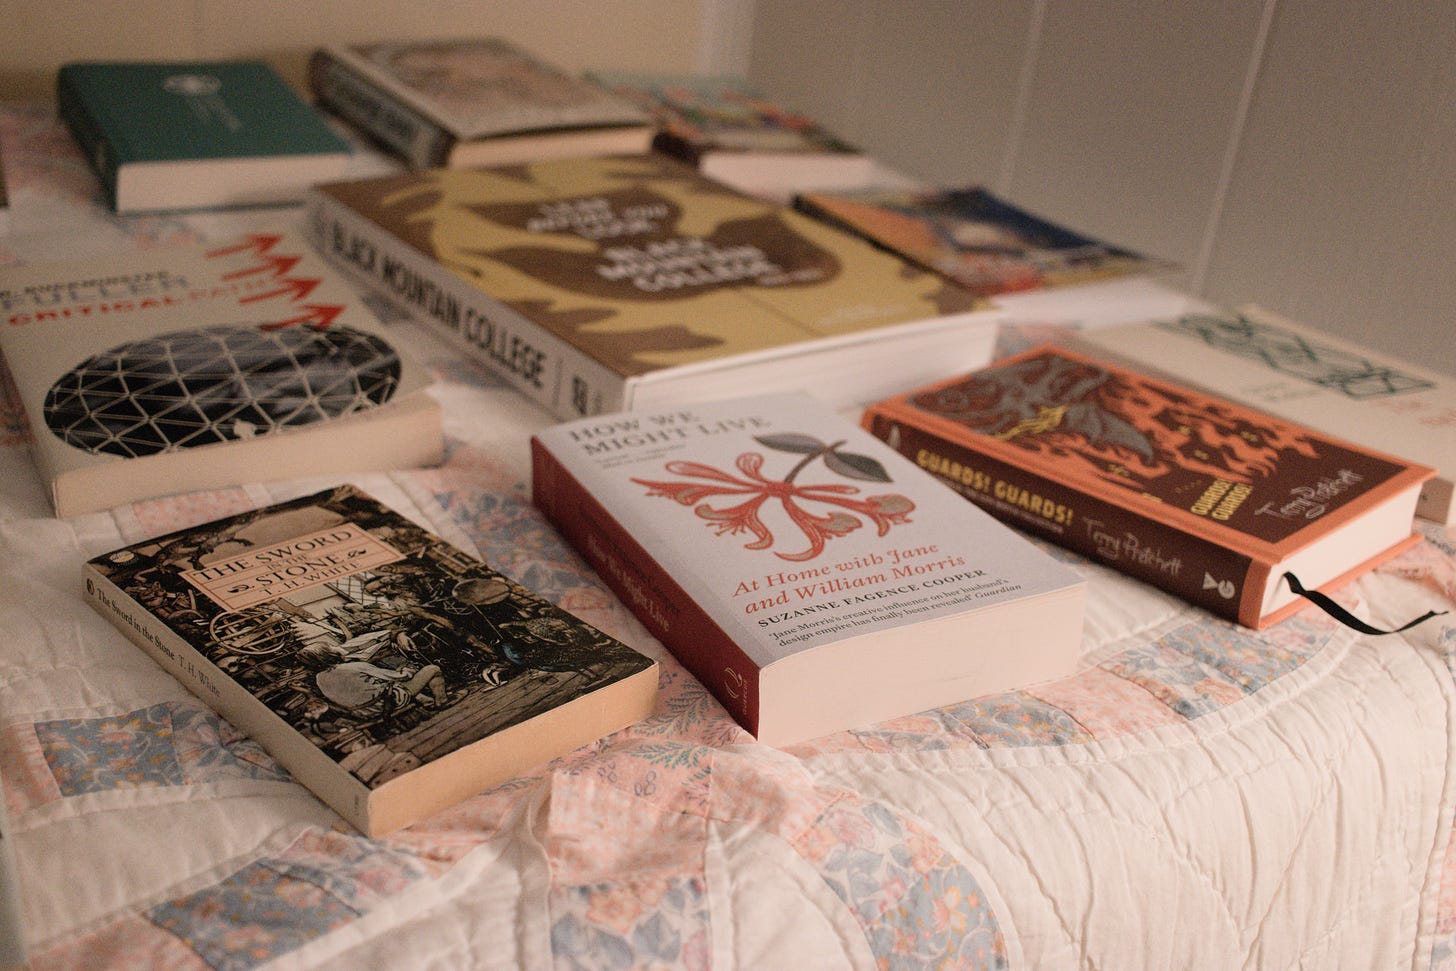 Books on a quilted spread including Sword in the Stone, Guards Guards, and Buckminster Fuller's Critical Path. Others are blurred. They are covering the bed.